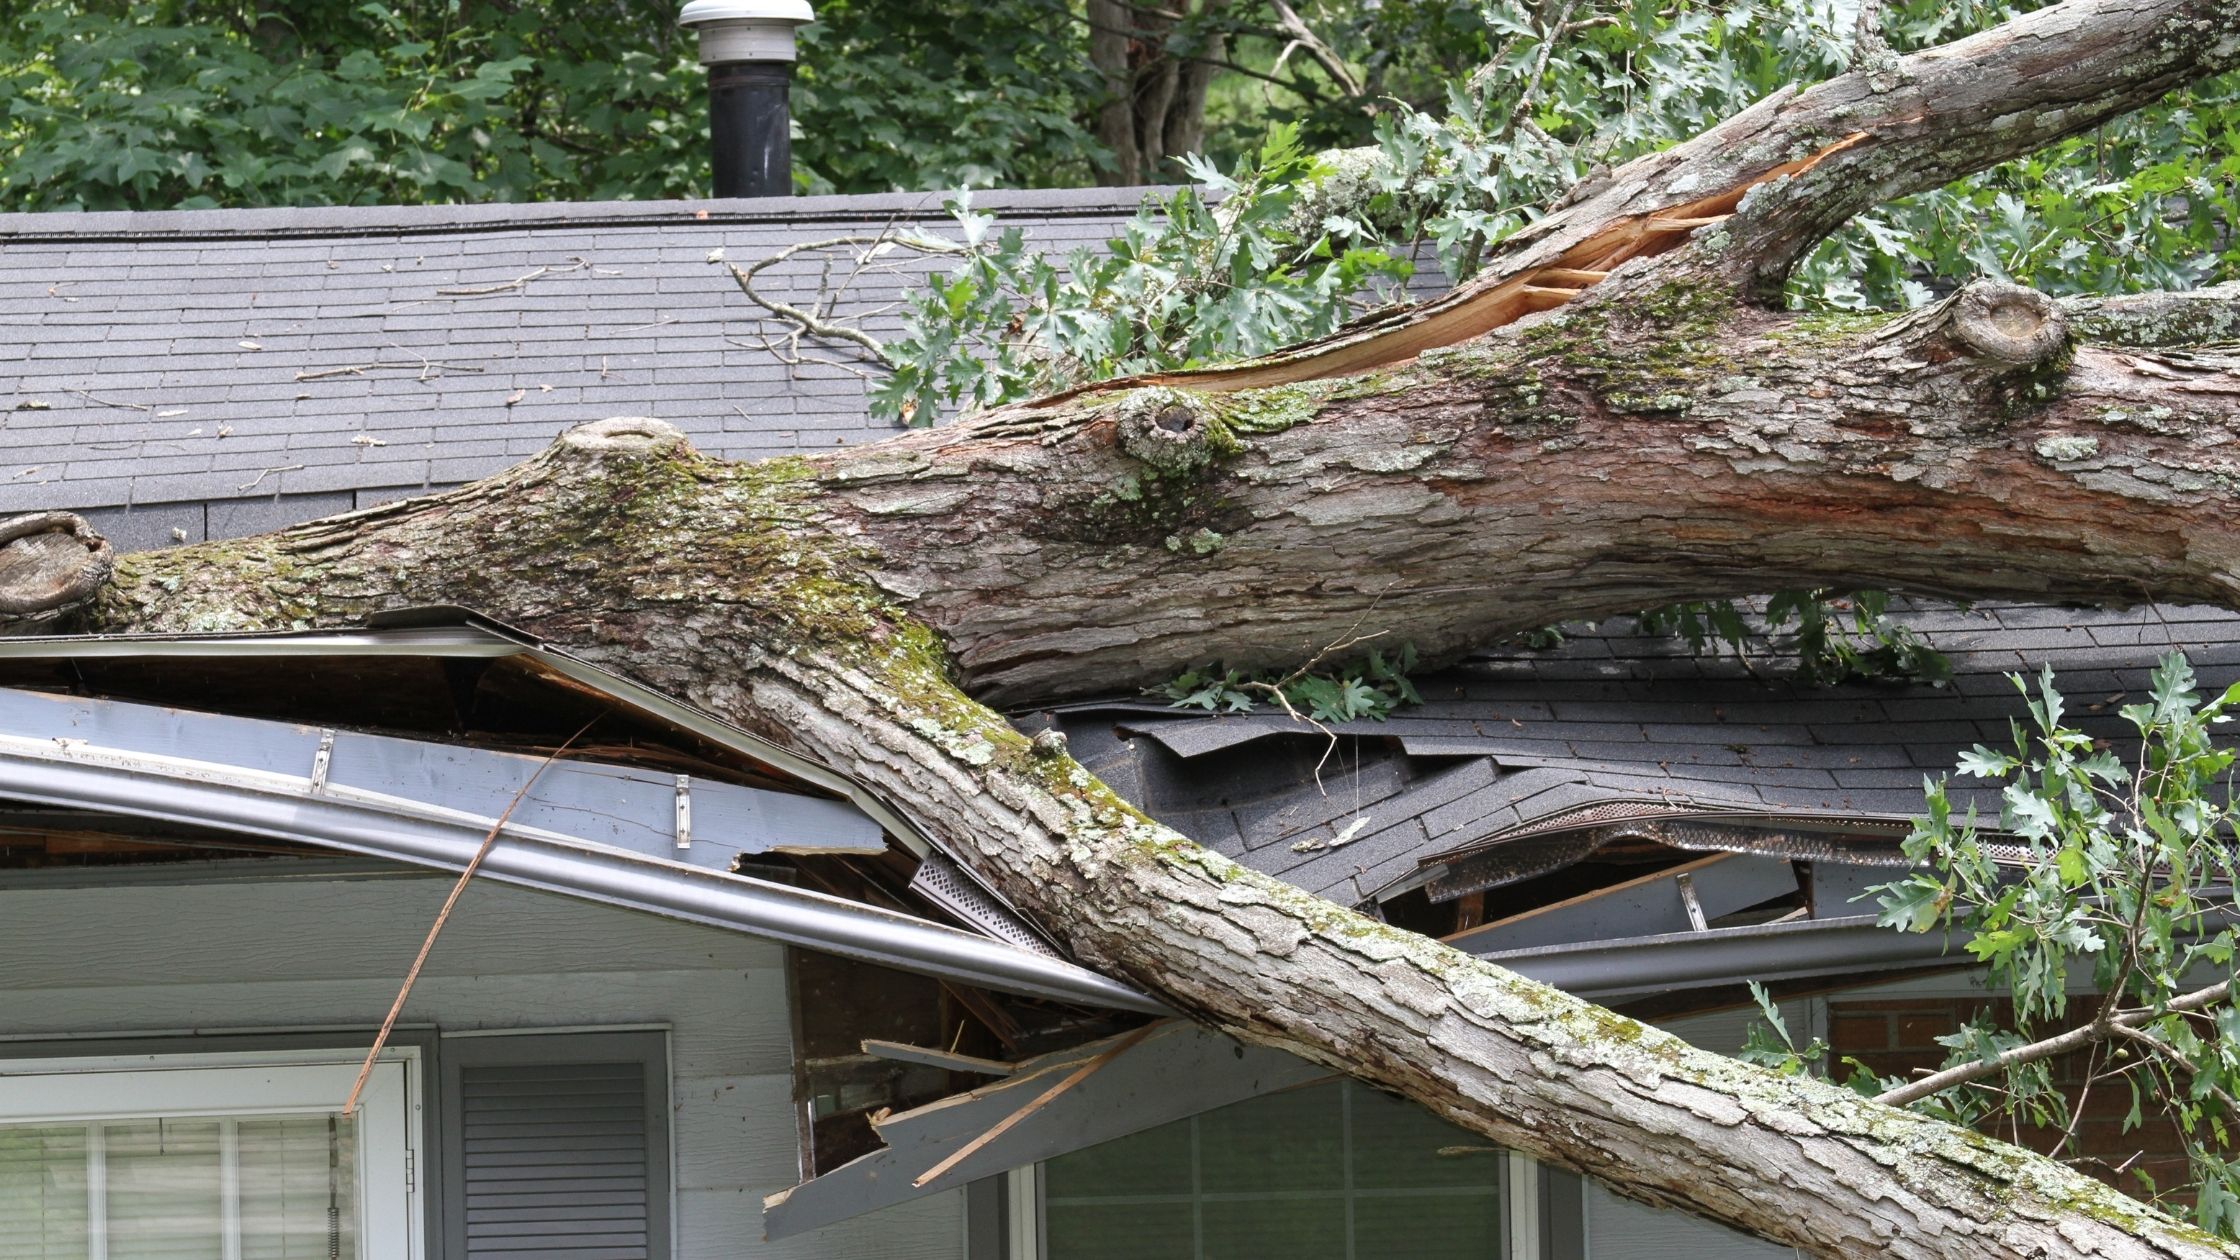 Which Natural Disasters Does My Homeowner's Insurance Cover?